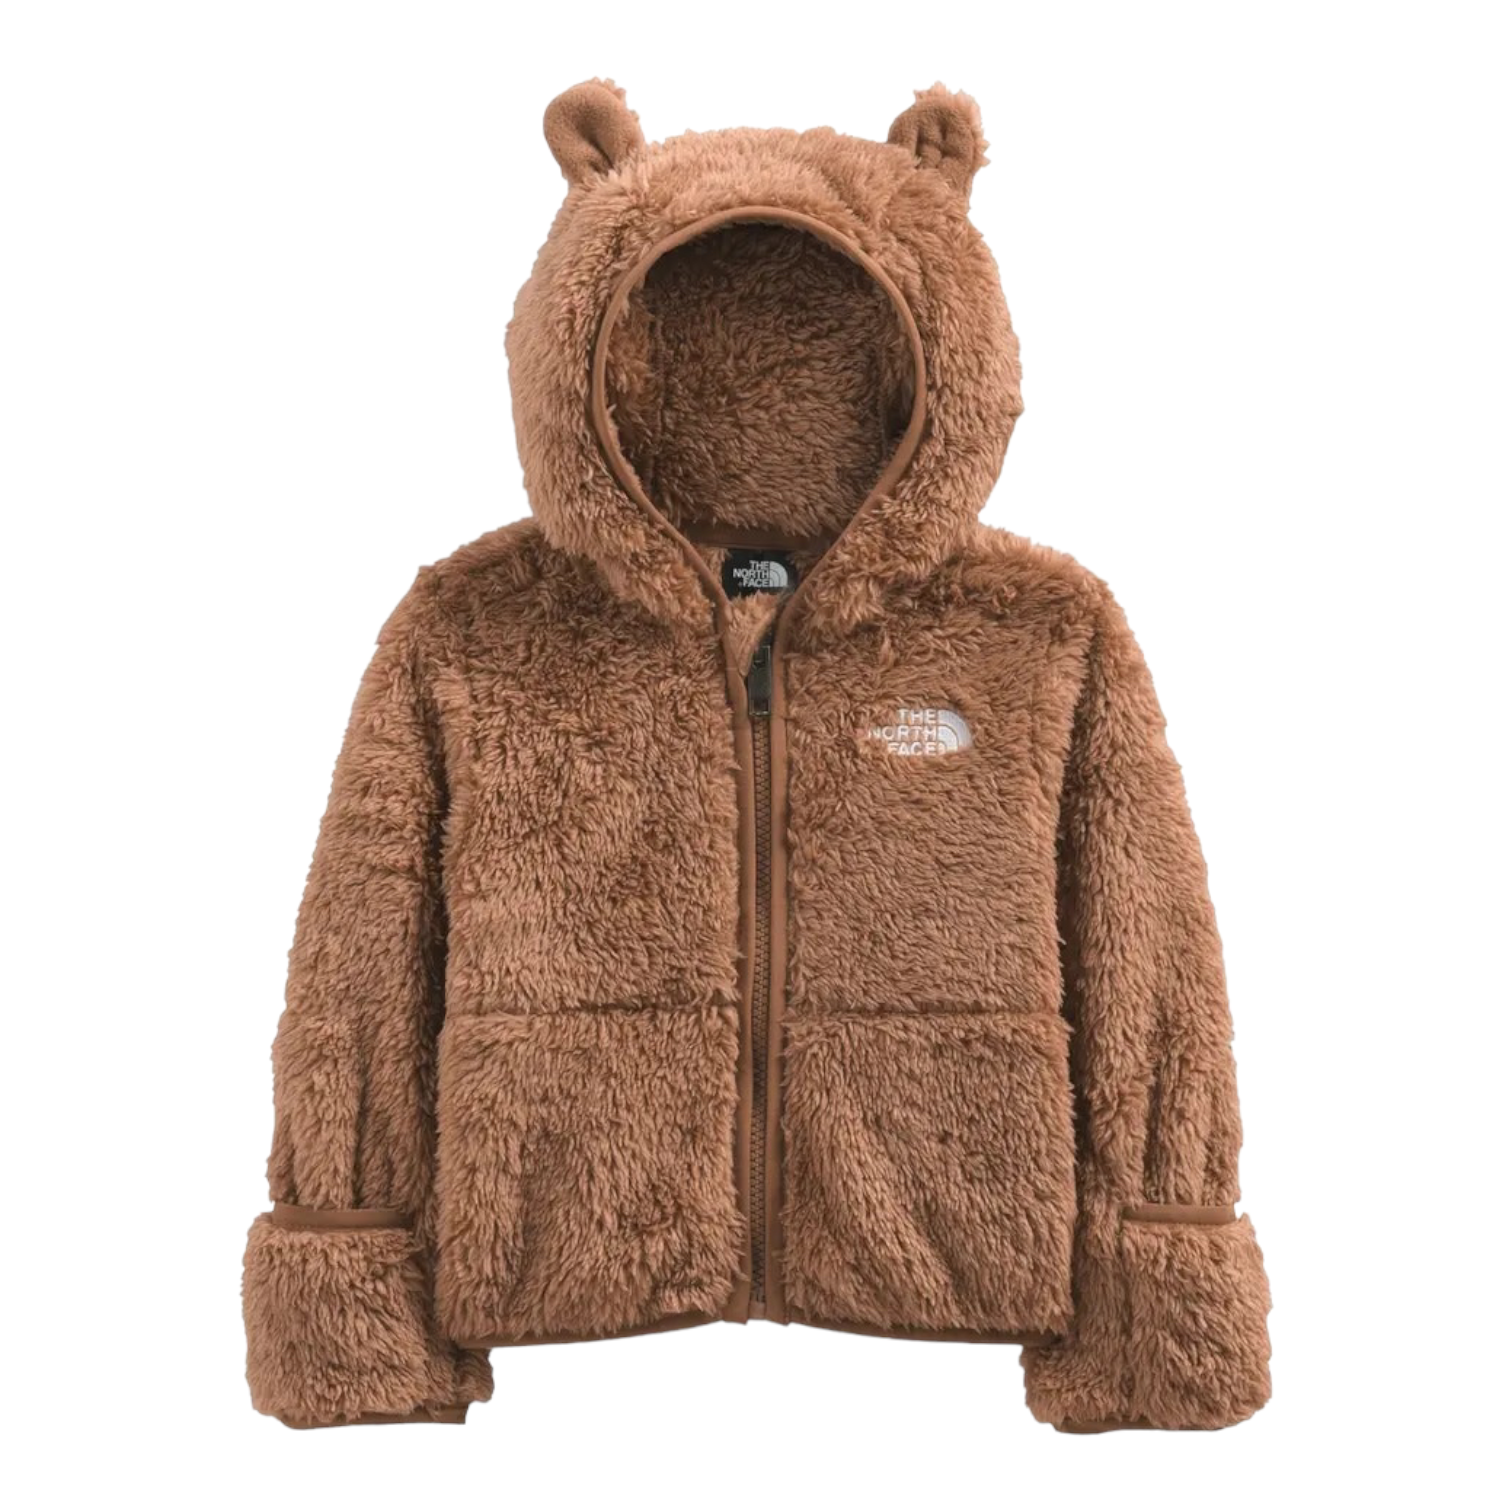 The North Face Baby Bear F/Z Hoodie - Toasted Brown